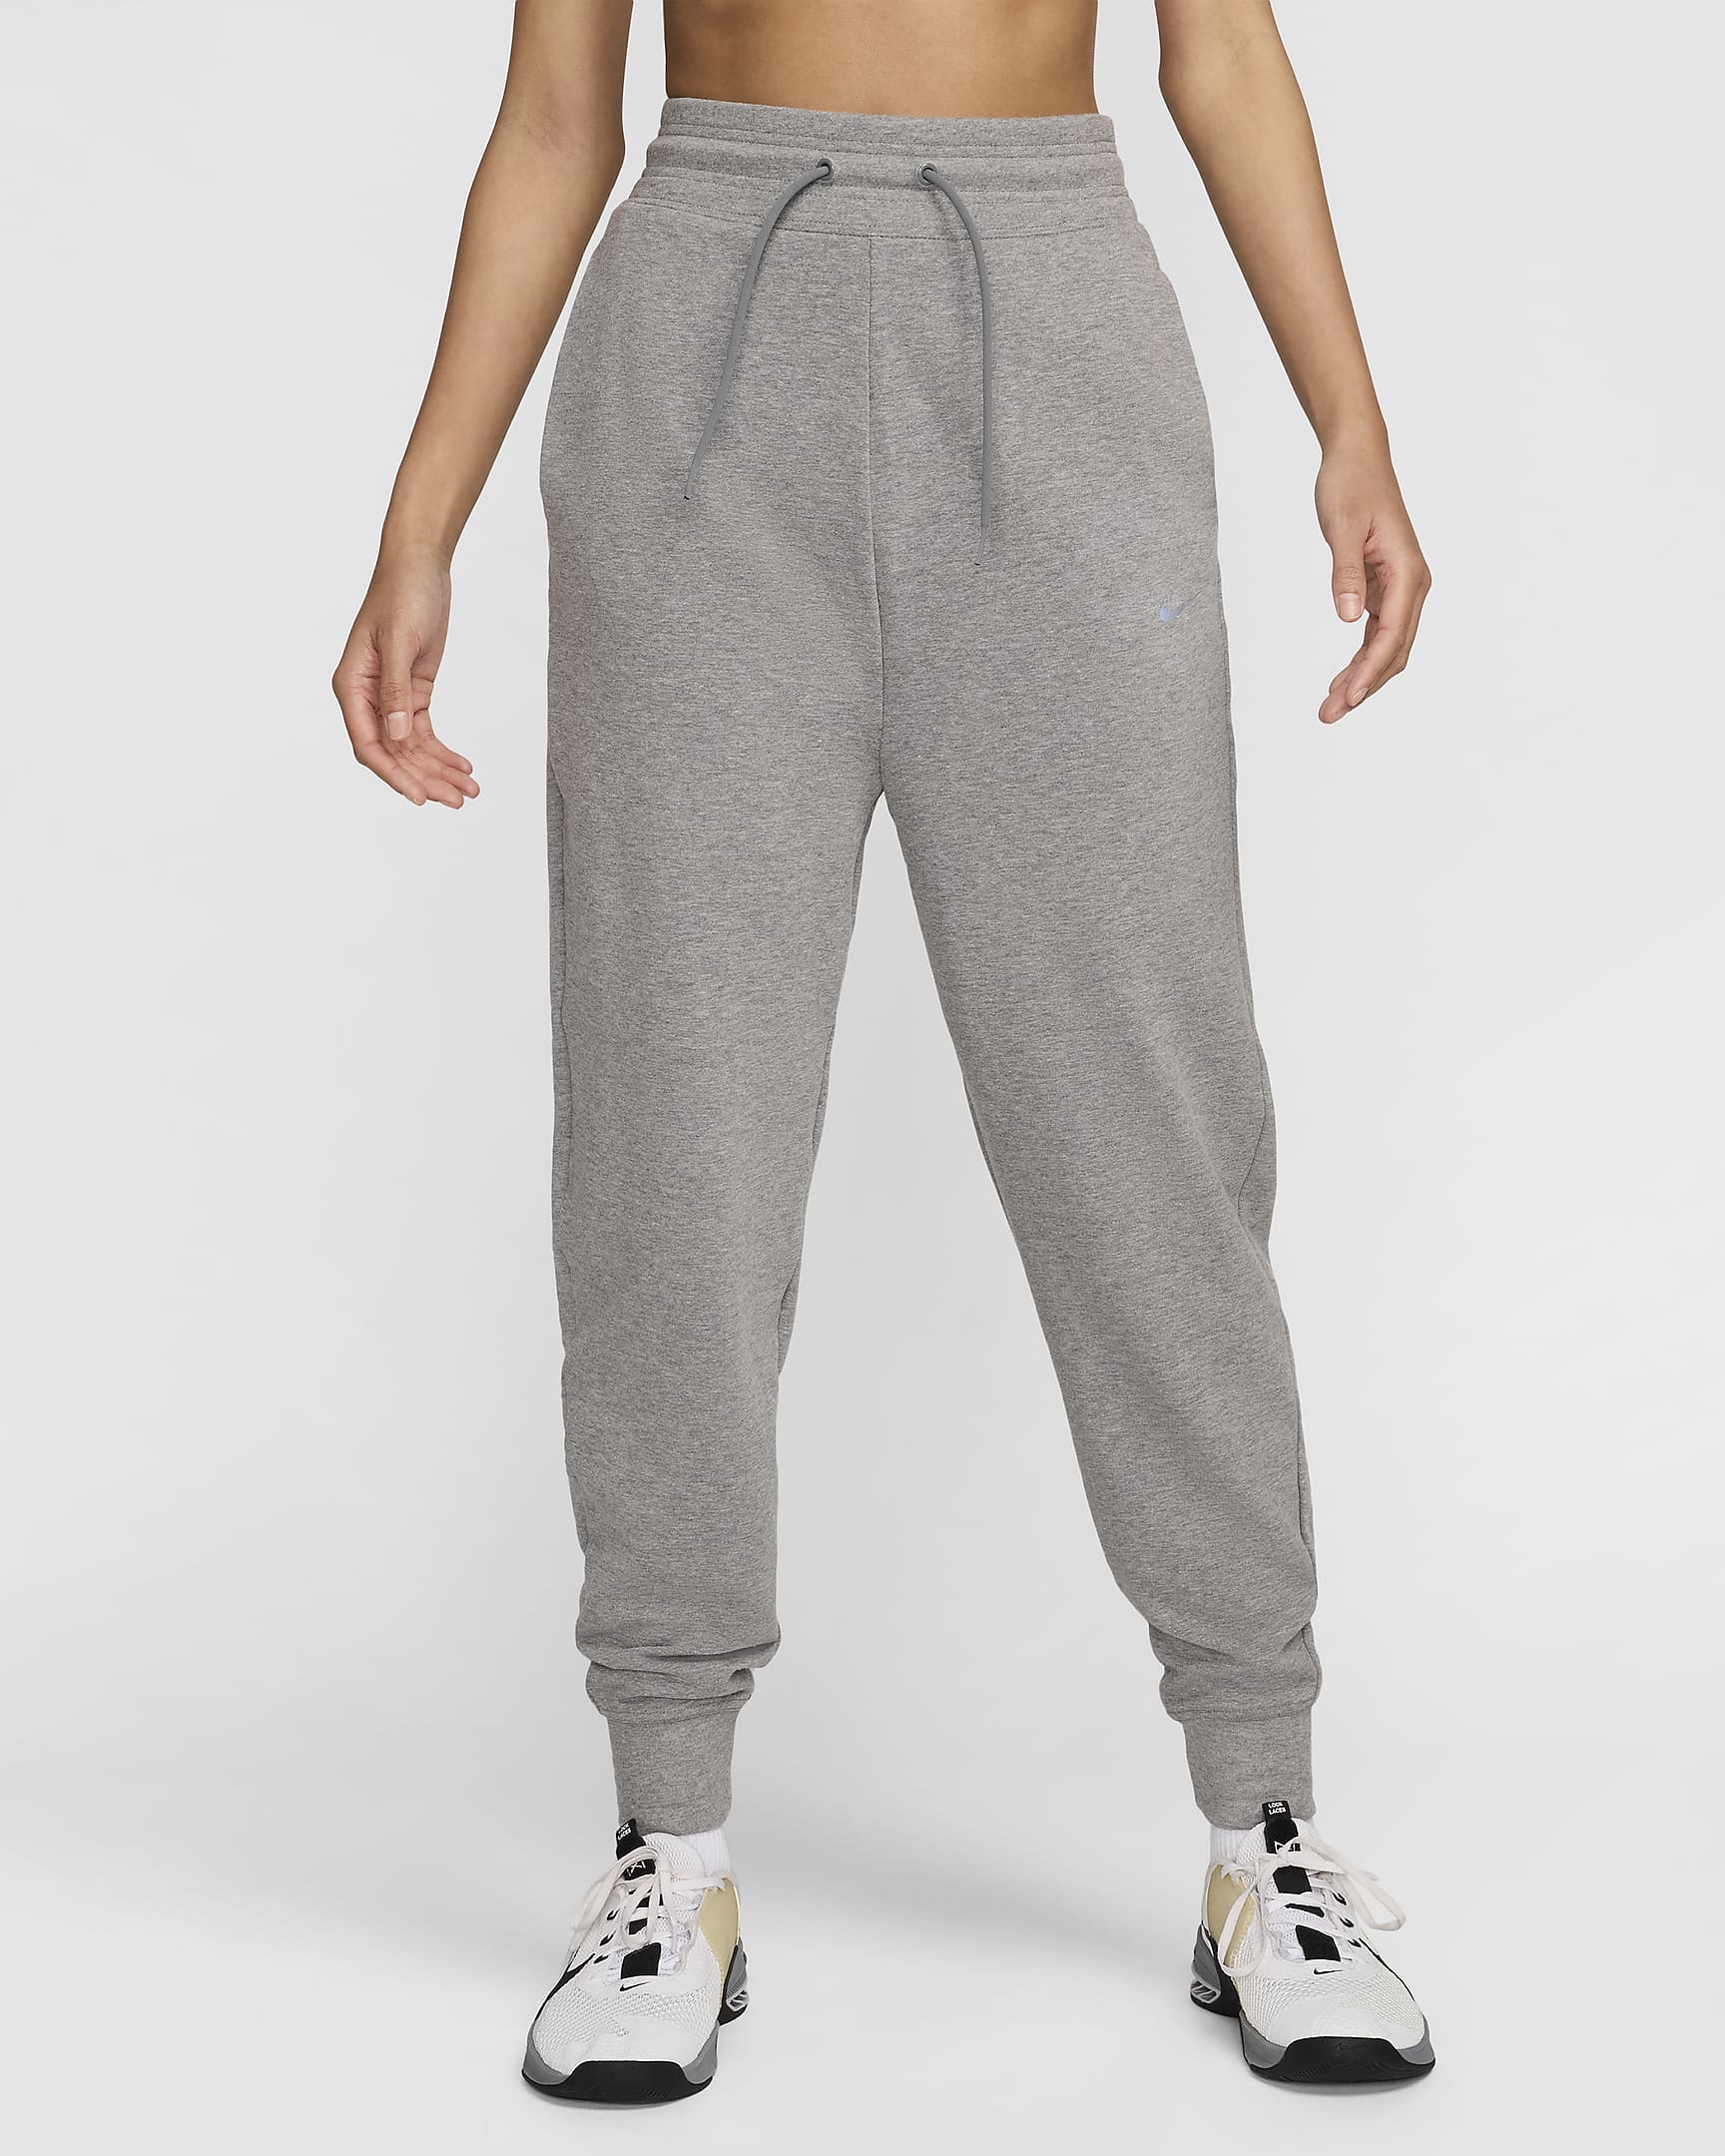 Nike Dri-FIT One Women's High-Waisted 7/8 French Terry Joggers. Nike.com